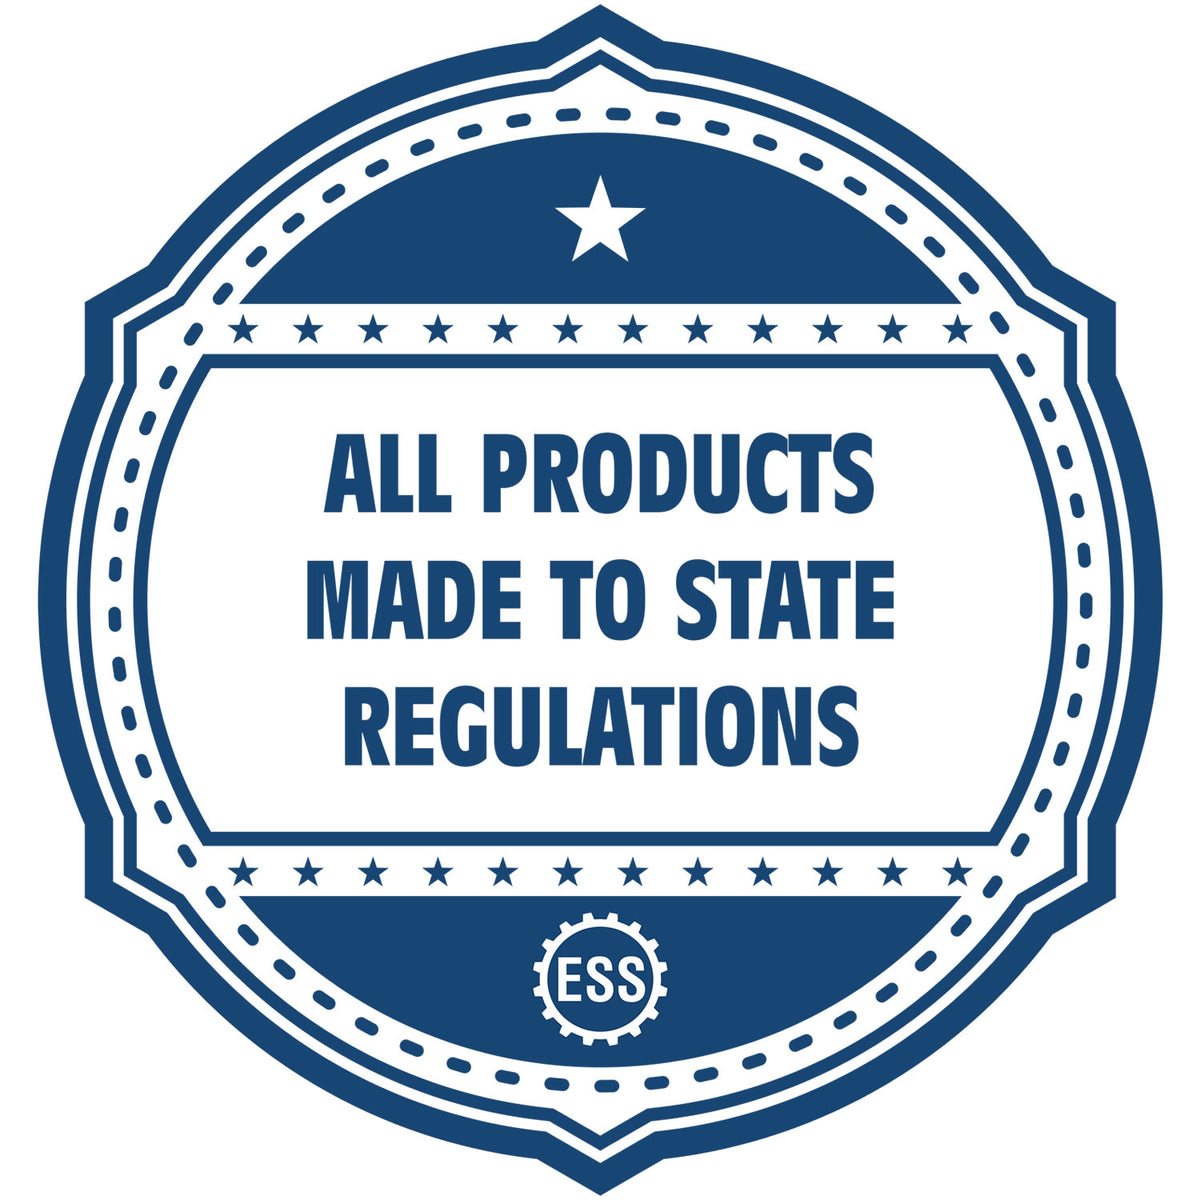 A blue icon or badge for the Self-Inking Texas Geologist Stamp showing that this product is made in compliance with state regulations.